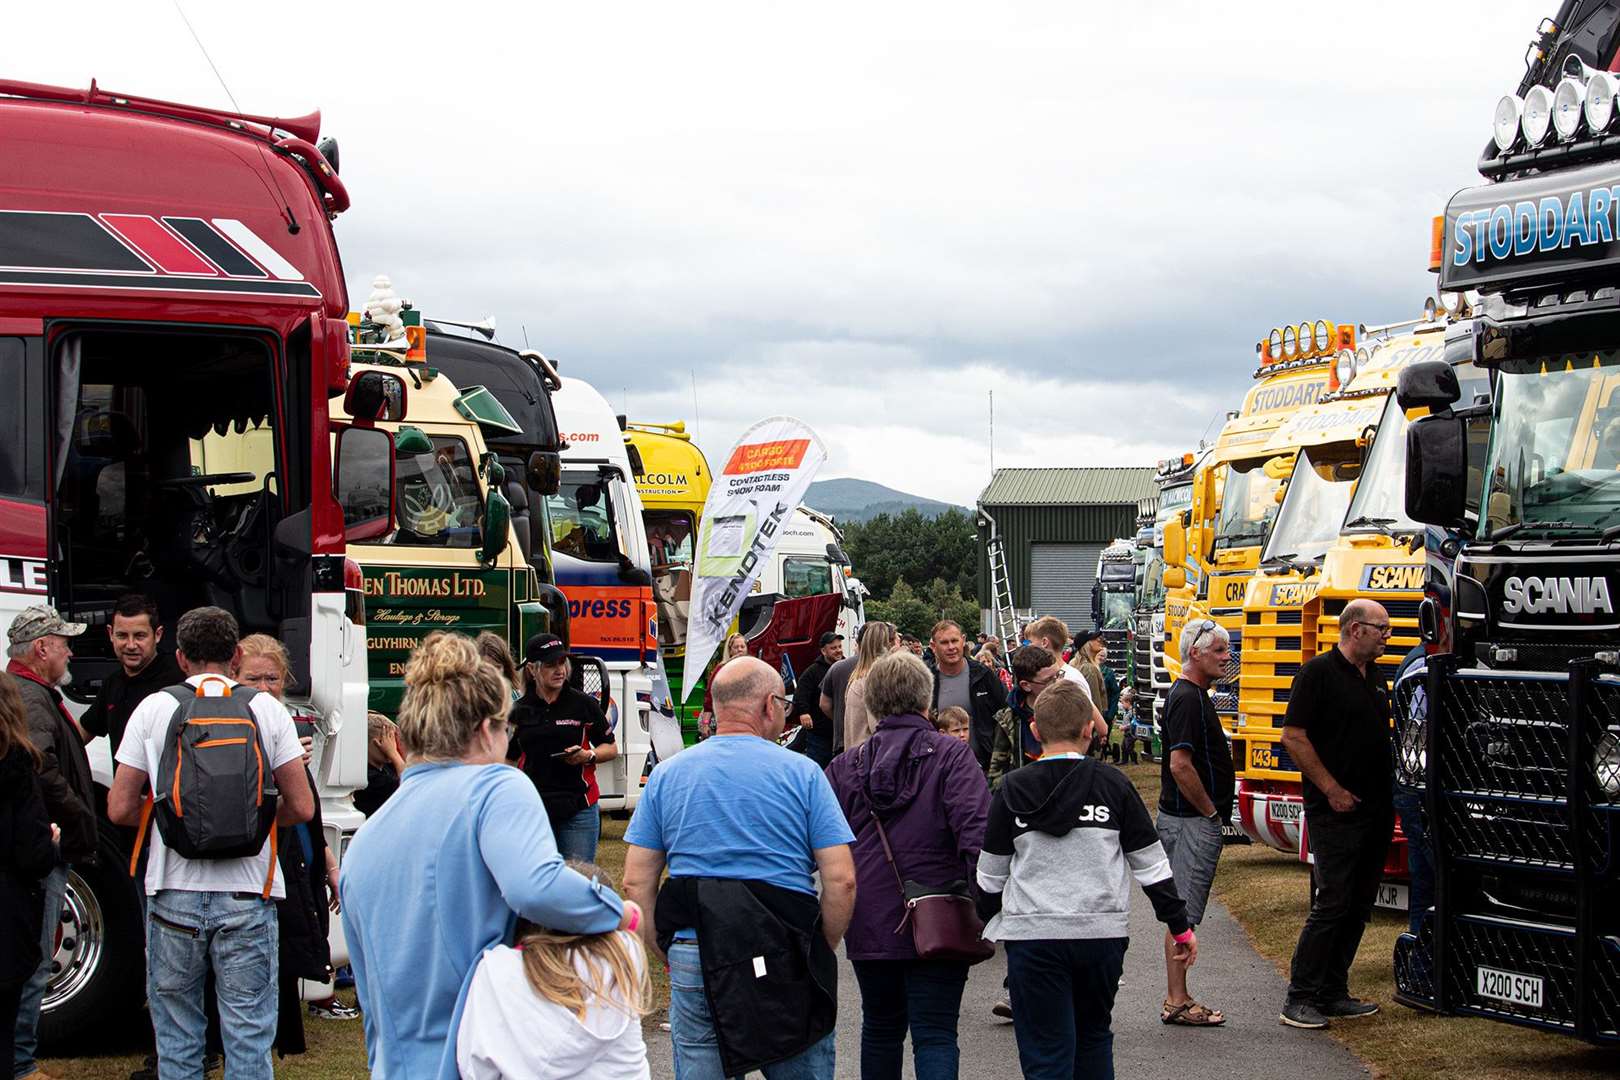 Crowds turned out in great numbers at the Black Isle showgrounds for this year's exhibition of trucks. Photo: Niall Harkiss